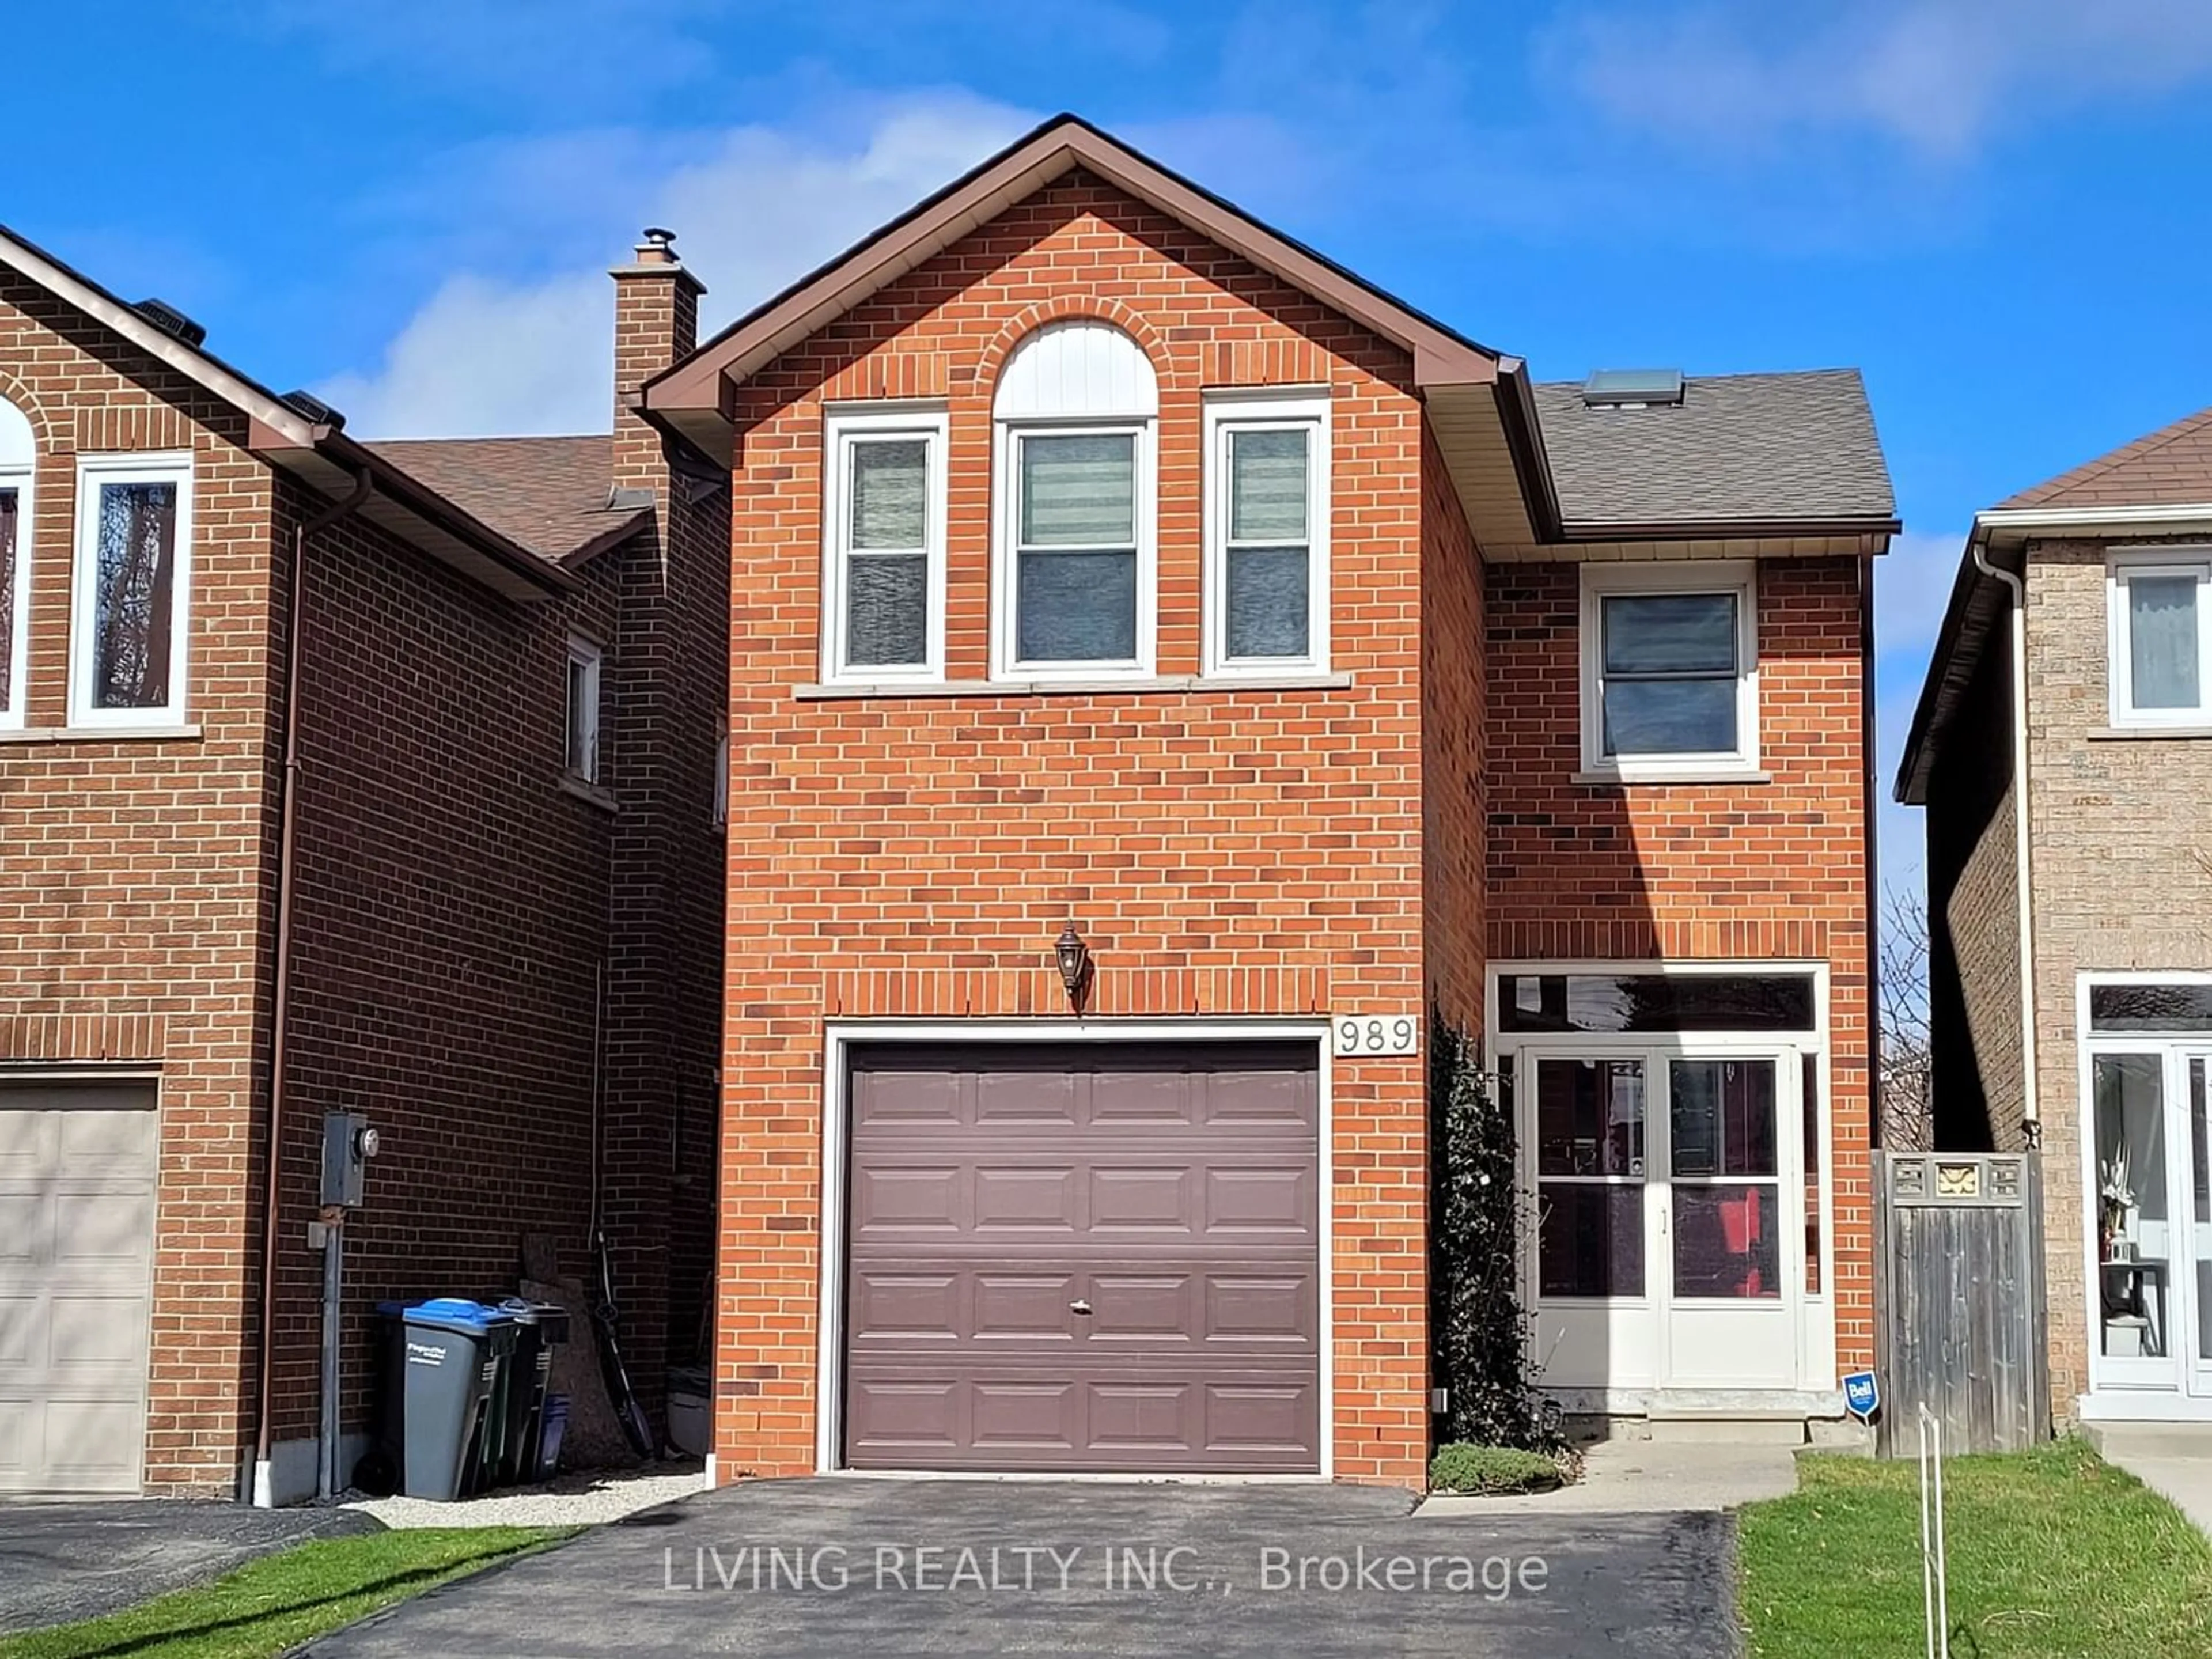 Home with brick exterior material for 989 Whispering Wood Dr, Mississauga Ontario L5C 3Z1